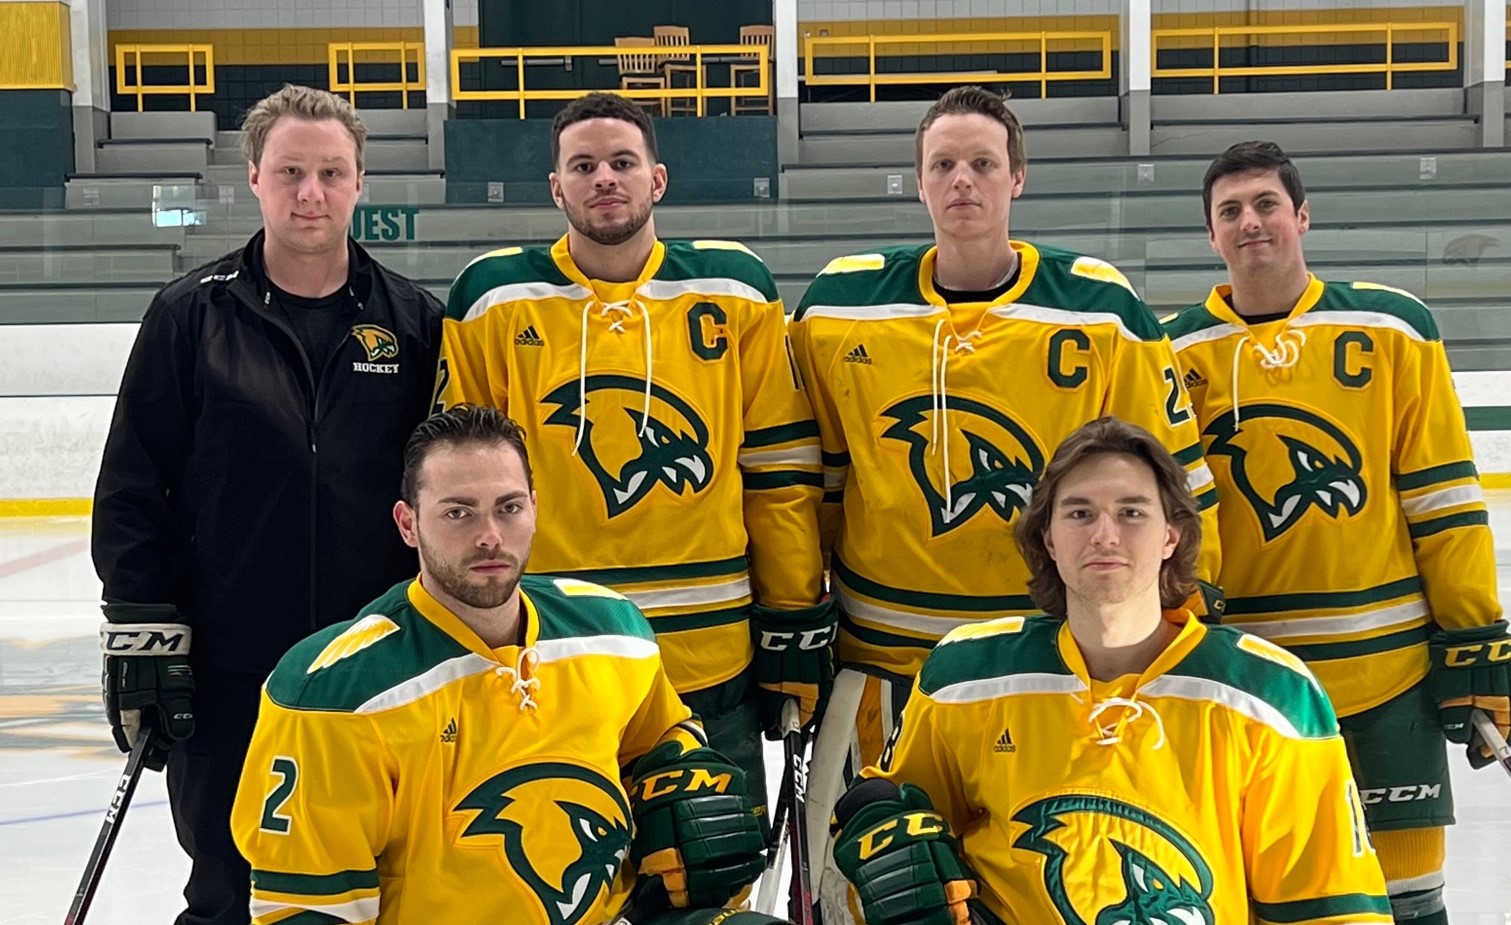 Falcons Draw Even With Lancers On Senior Night